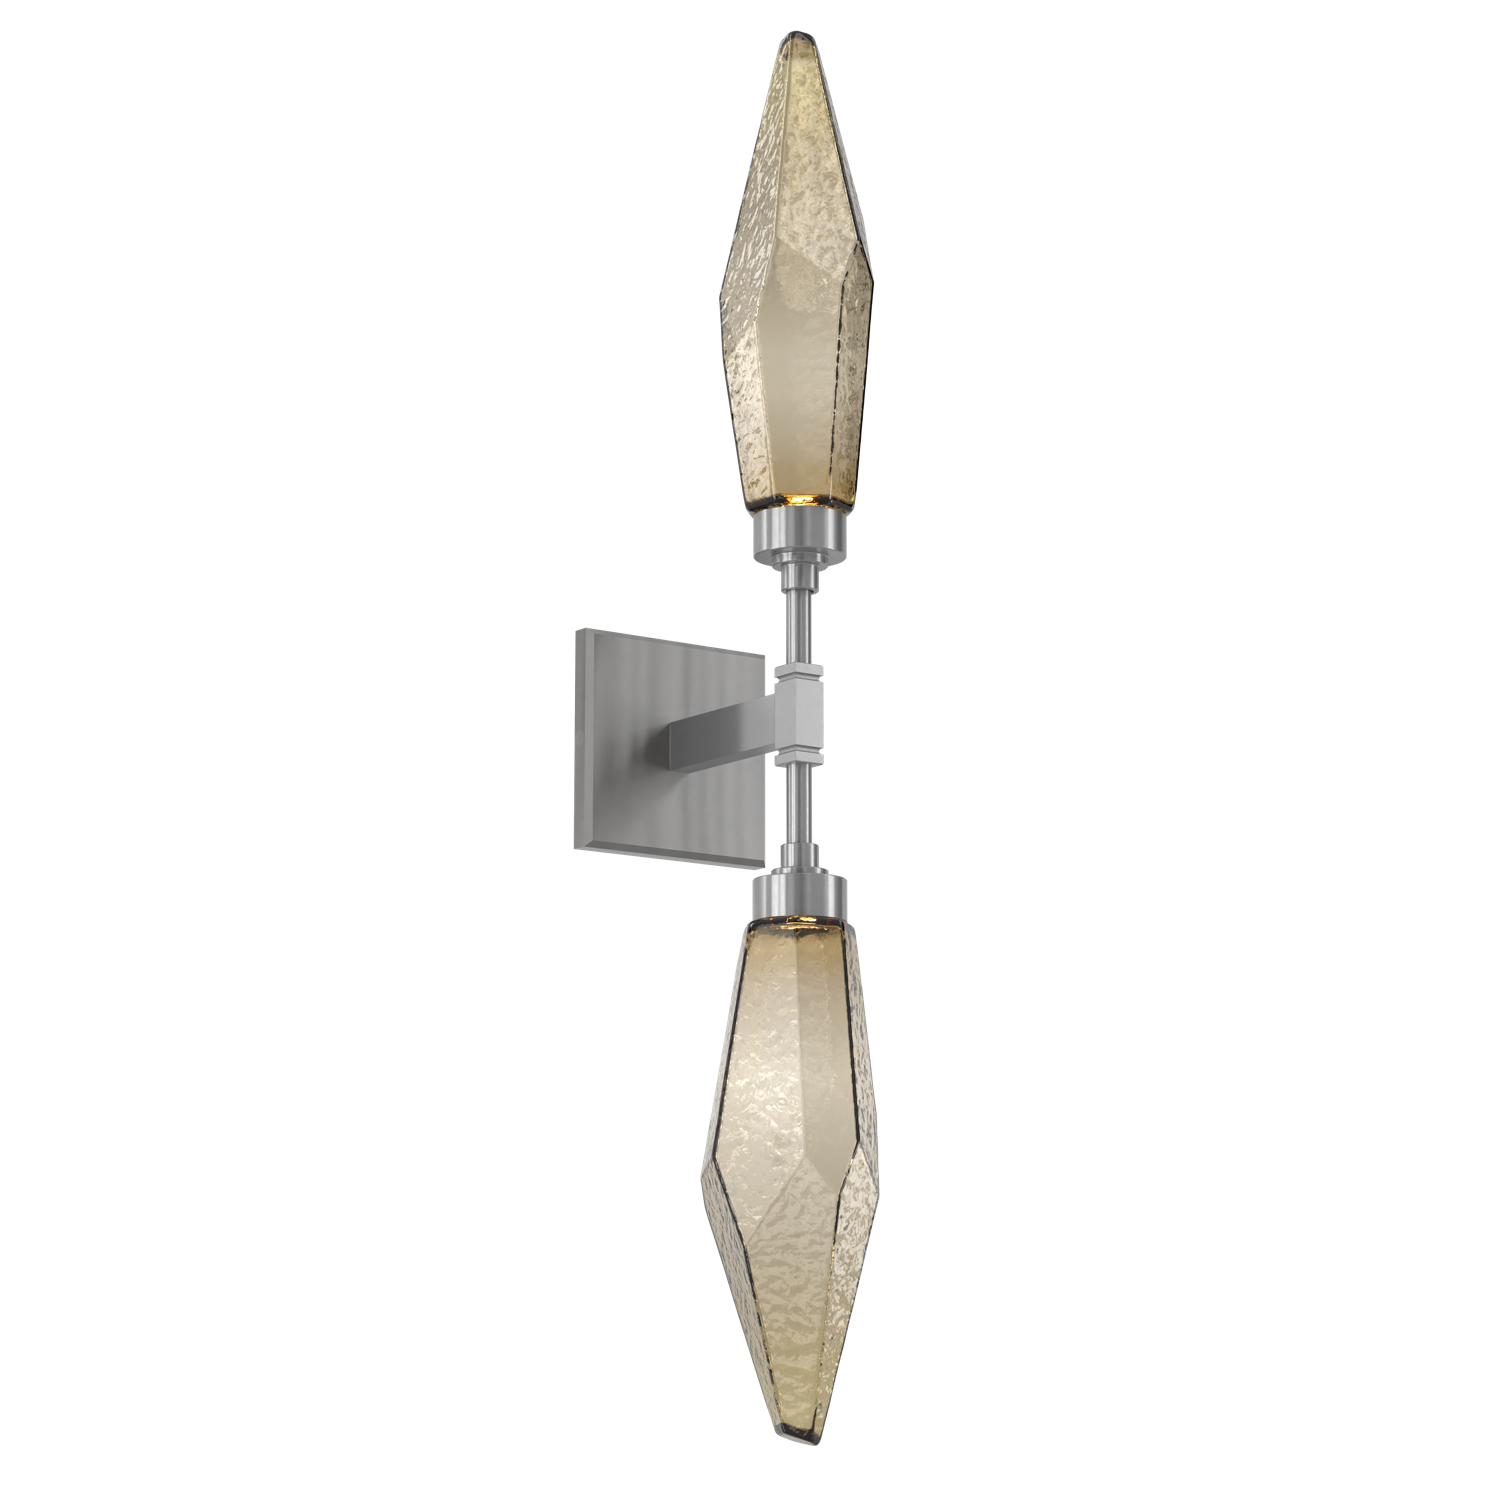 IDB0050-02-GM-CB-Hammerton-Studio-Rock-Crystal-wall-sconce-with-gunmetal-finish-and-chilled-bronze-blown-glass-shades-and-LED-lamping